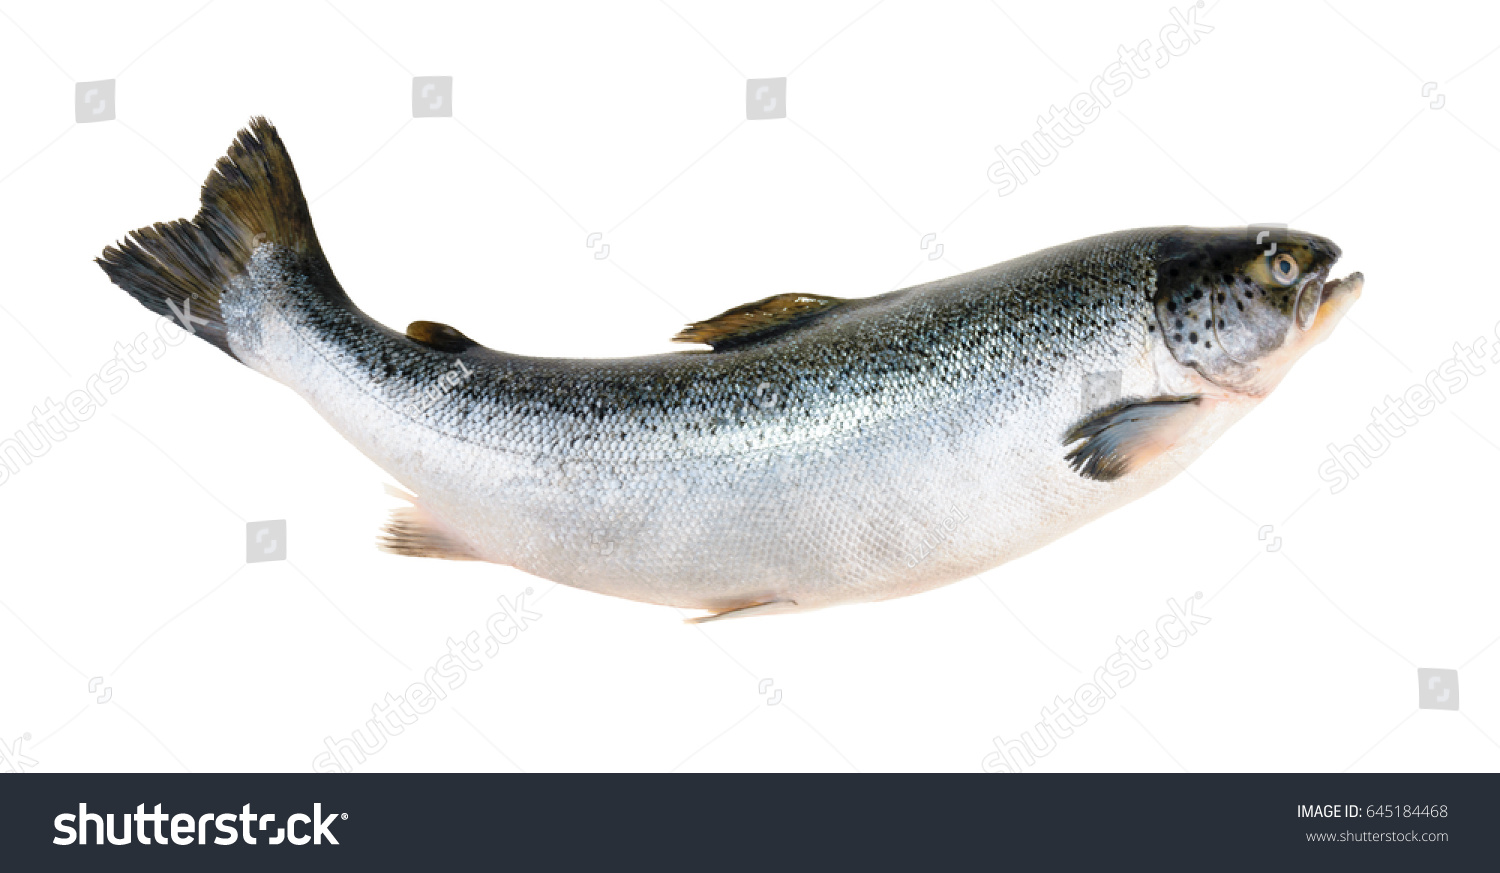 Salmon fish isolated on white without shadow #645184468